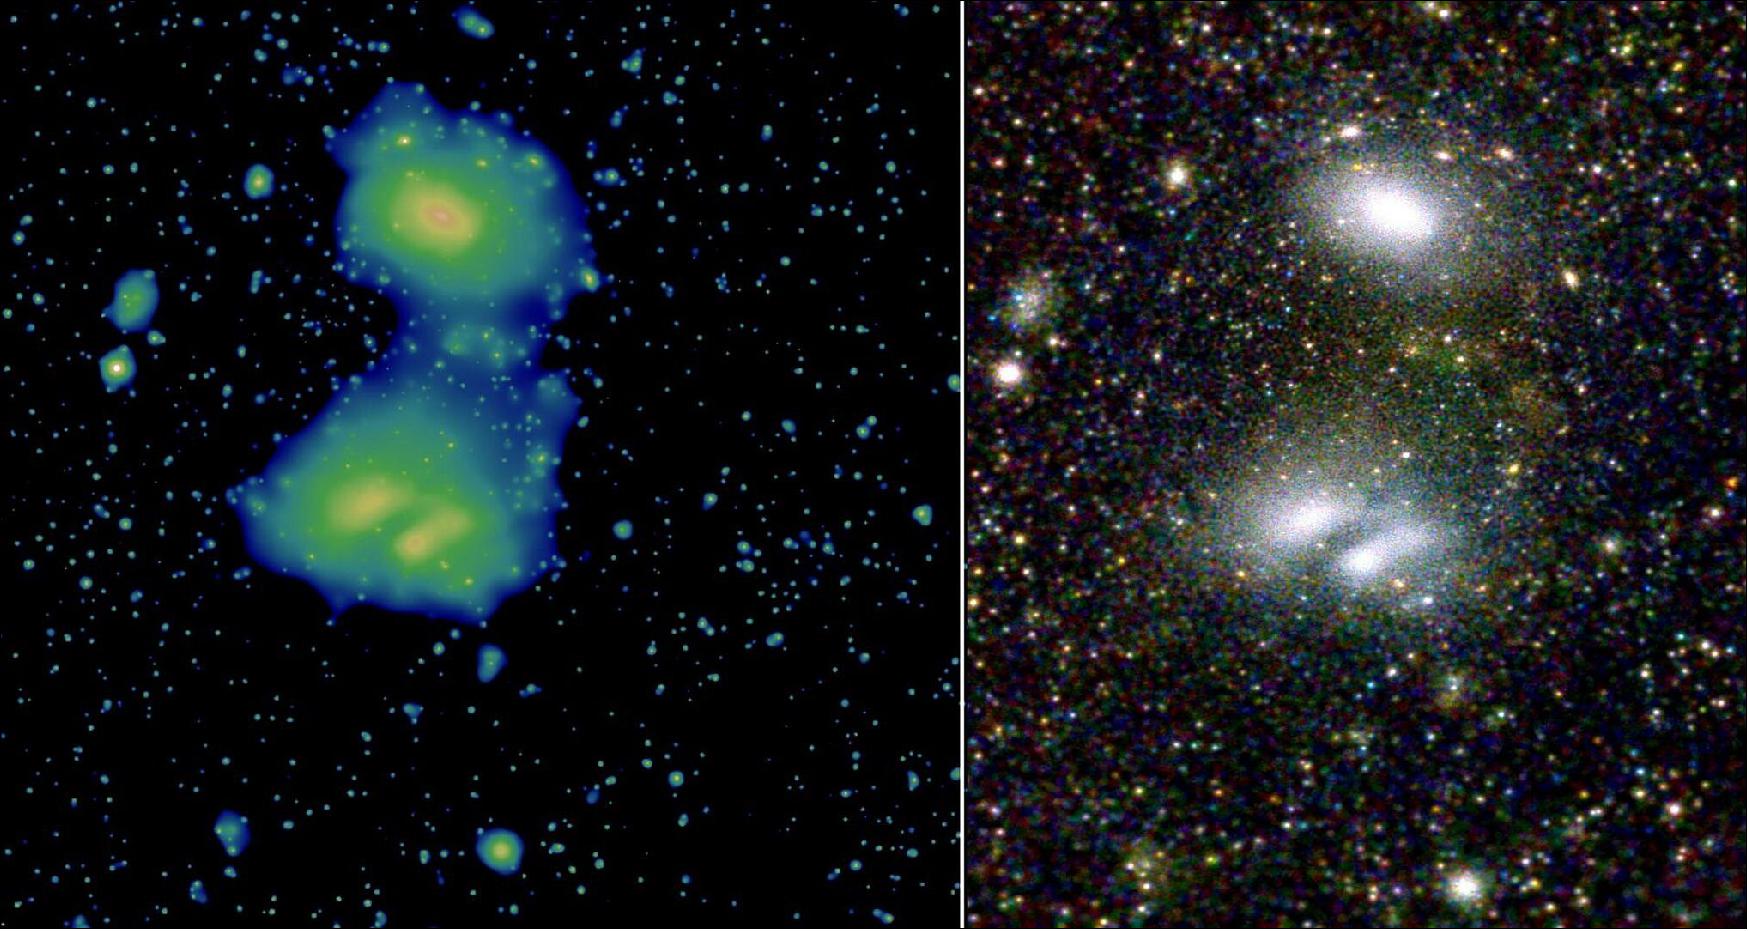 Figure 20: These eROSITA images show the two interacting galaxy clusters A3391, towards the top of the images, and the bimodal cluster A3395, towards the bottom, highlighting eROSITA’s excellent view of the distant Universe. They were observed in a series of image acquisitions performed between 17 and 18 October 2019, using all seven eROSITA telescope modules [image credit: T. Reiprich (Univ. Bonn), M. Ramos-Ceja (MPE), F. Pacaud (Univ. Bonn), D. Eckert (Univ. Geneva), J. Sanders (MPE), N. Ota (Univ. Bonn), E. Bulbul (MPE), V. Ghirardini (MPE), MPE/IKI] 36)